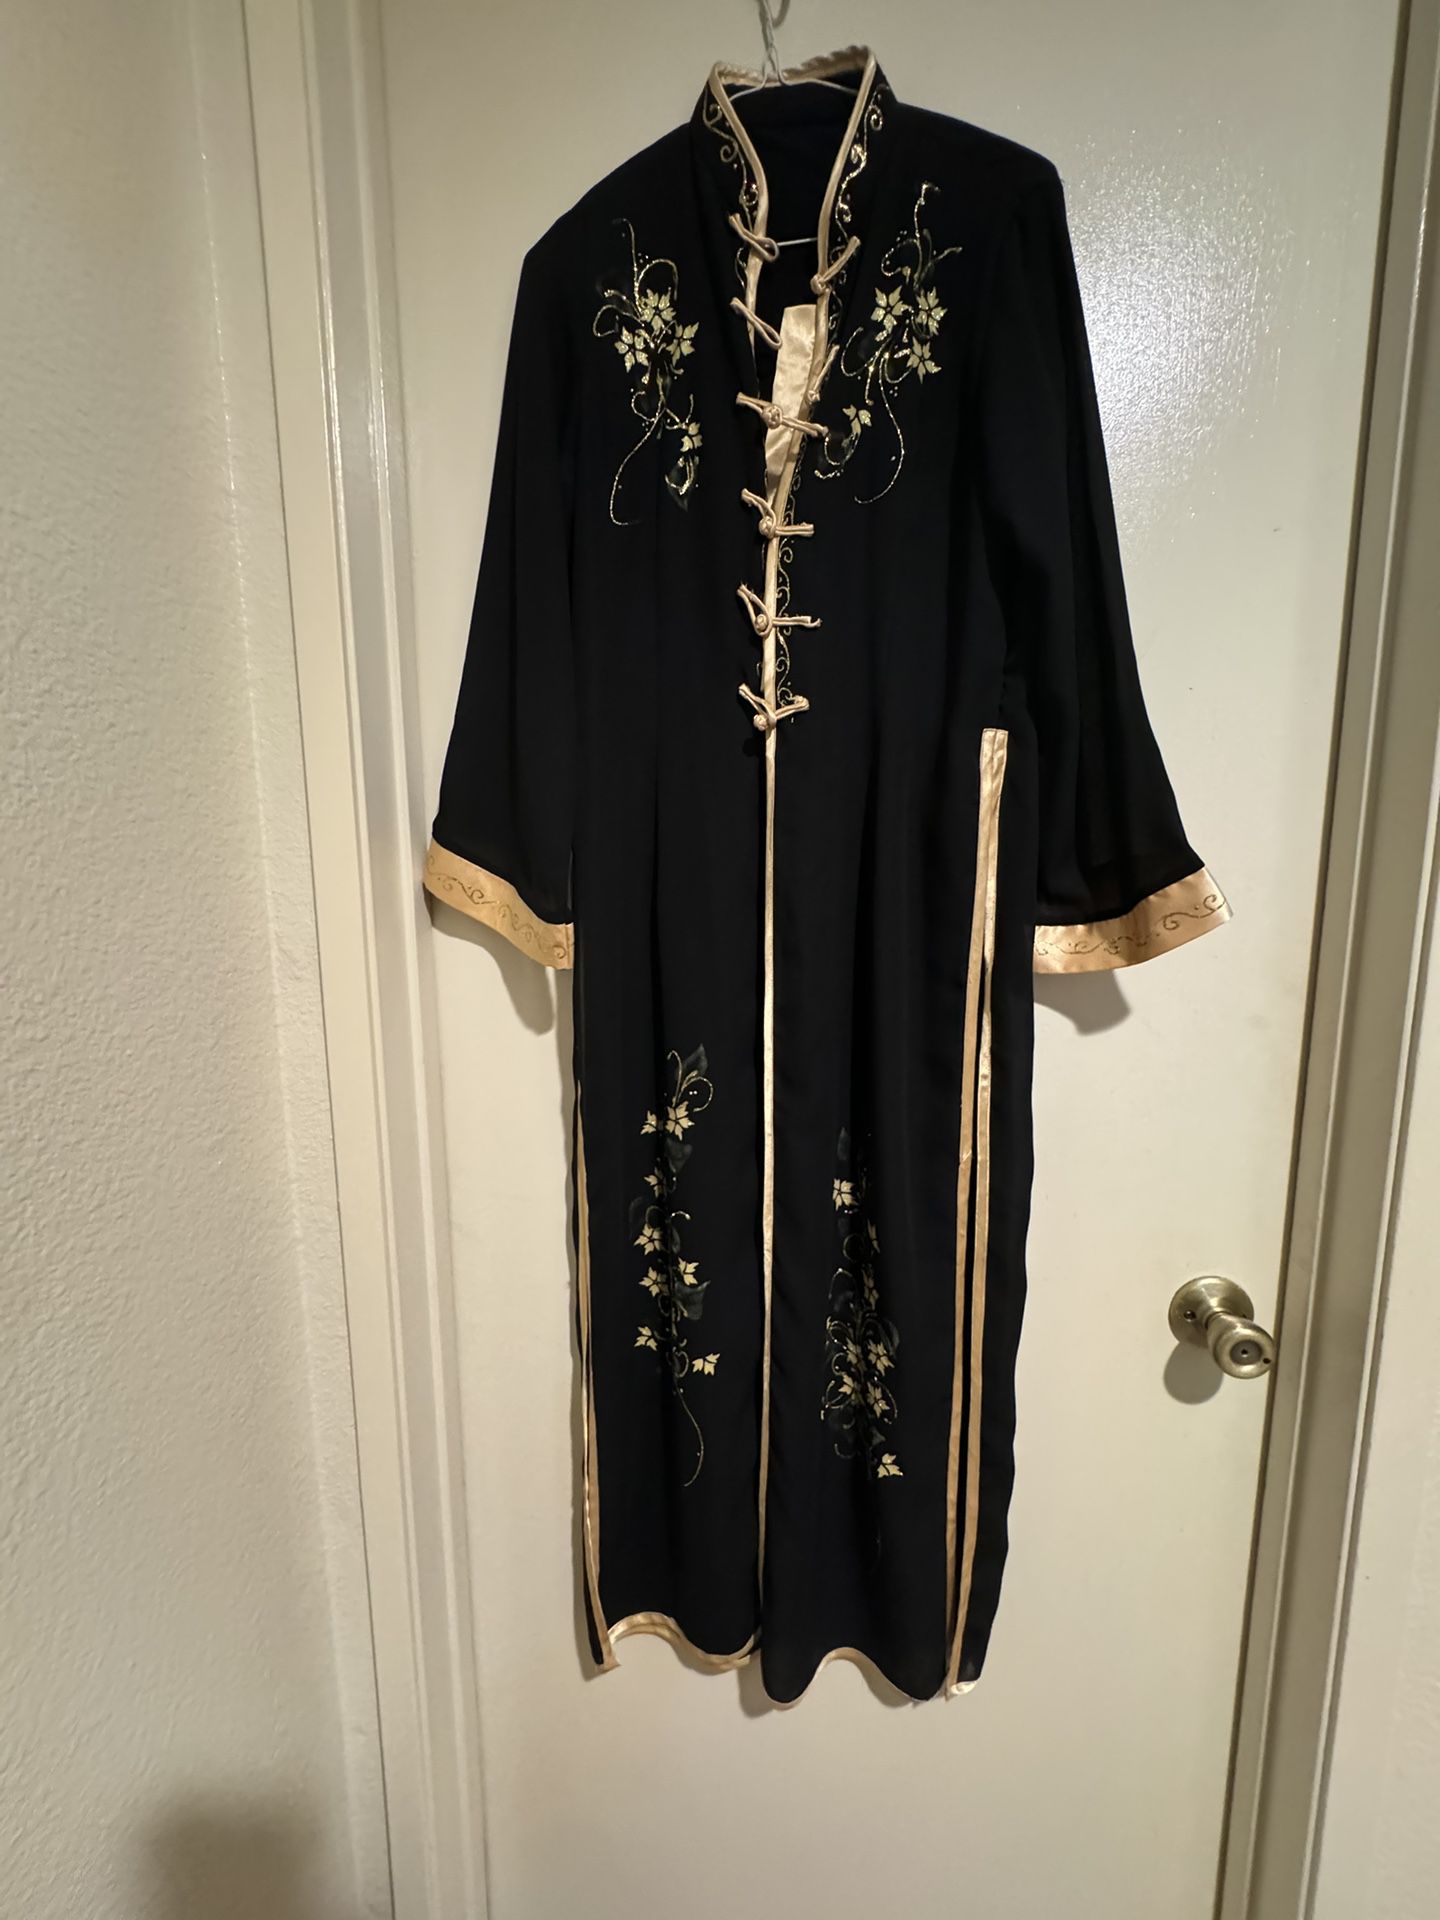 Black Long Dress Could Be Used As Robe